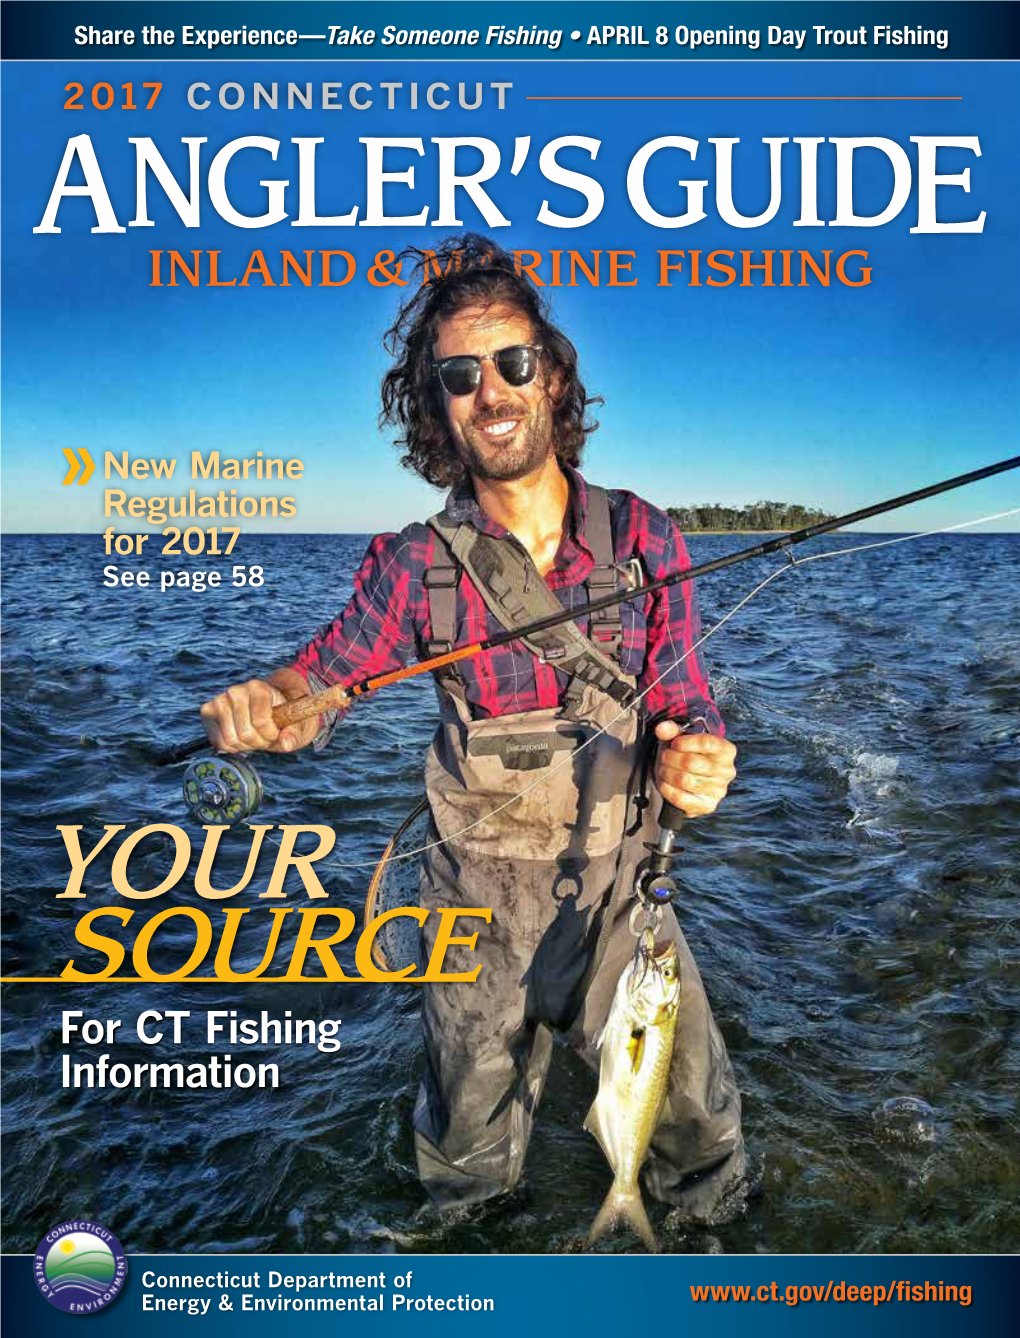 YOUR SOURCE for CT Fishing Information